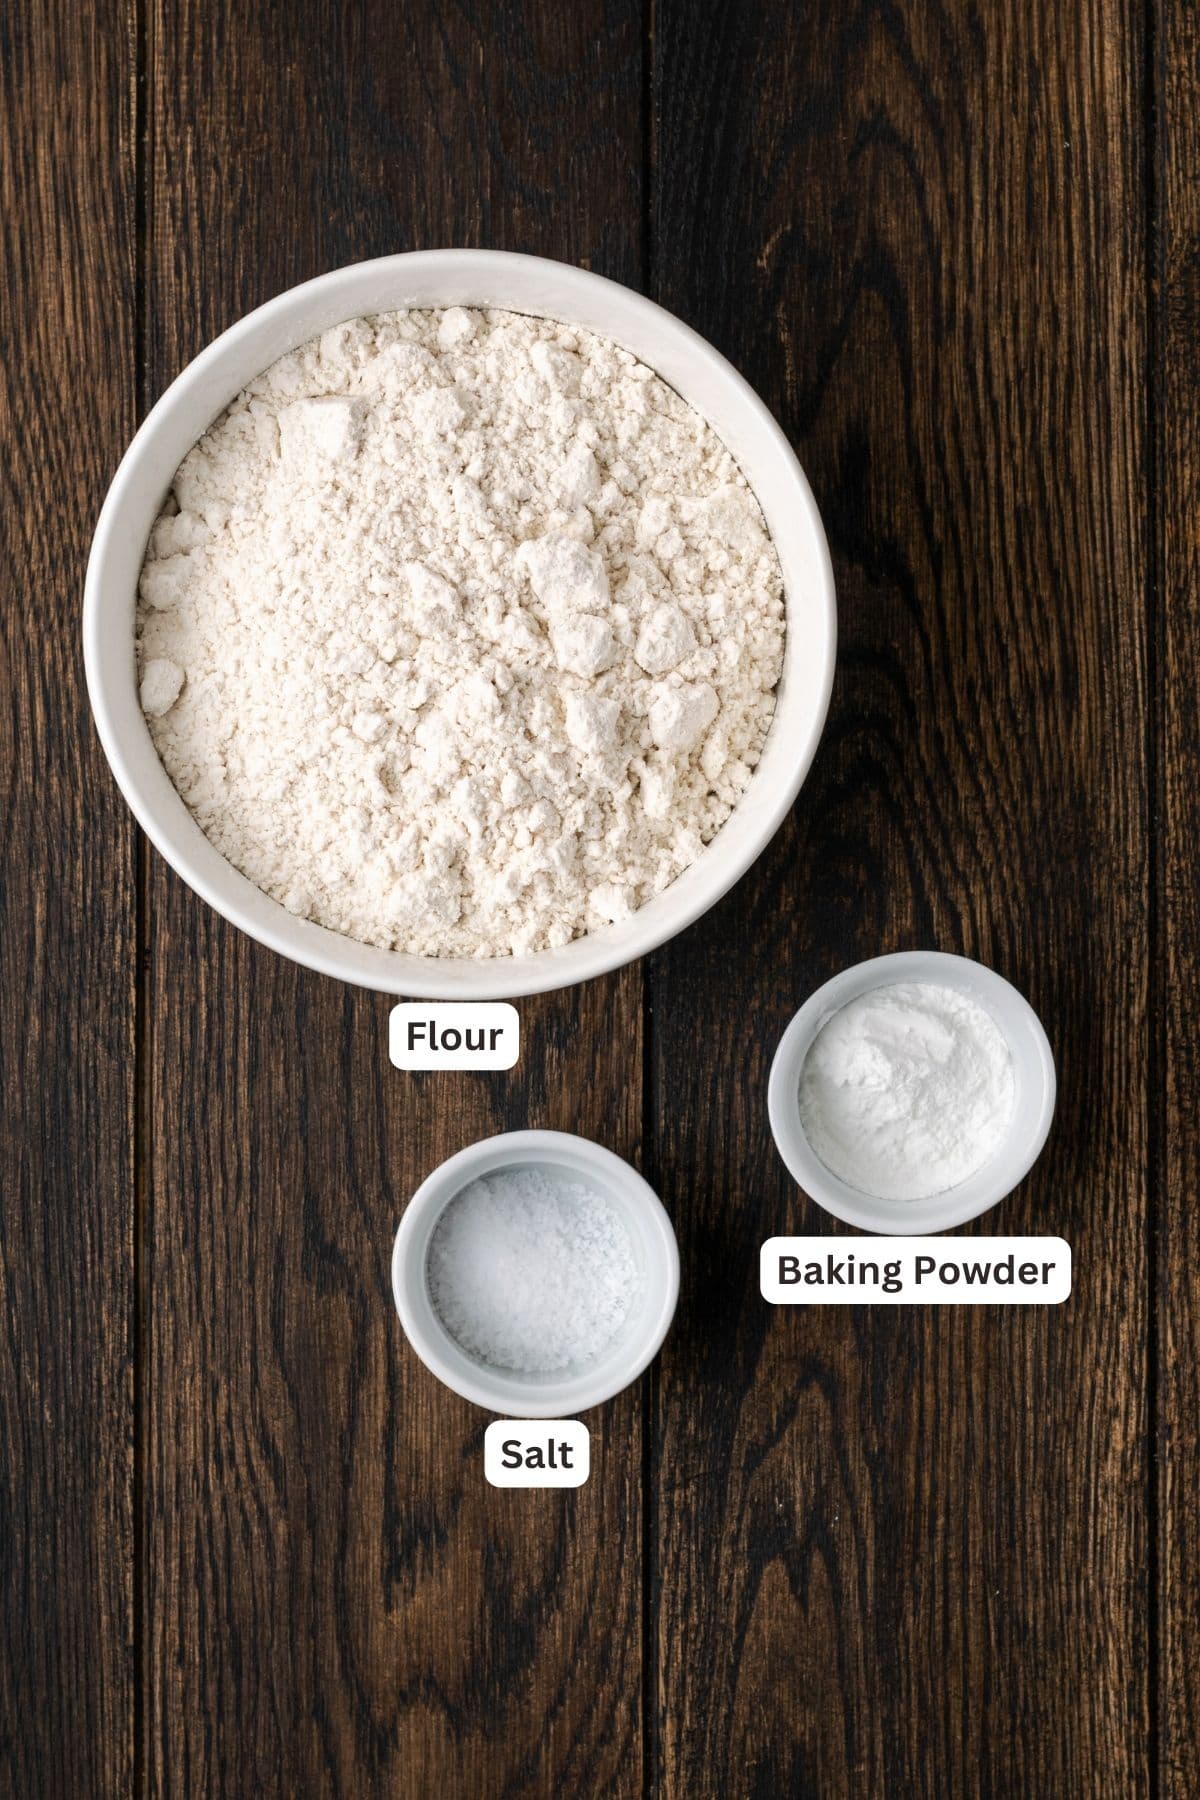 Ingredients for self rising flour with text labels overlaying each ingredient.